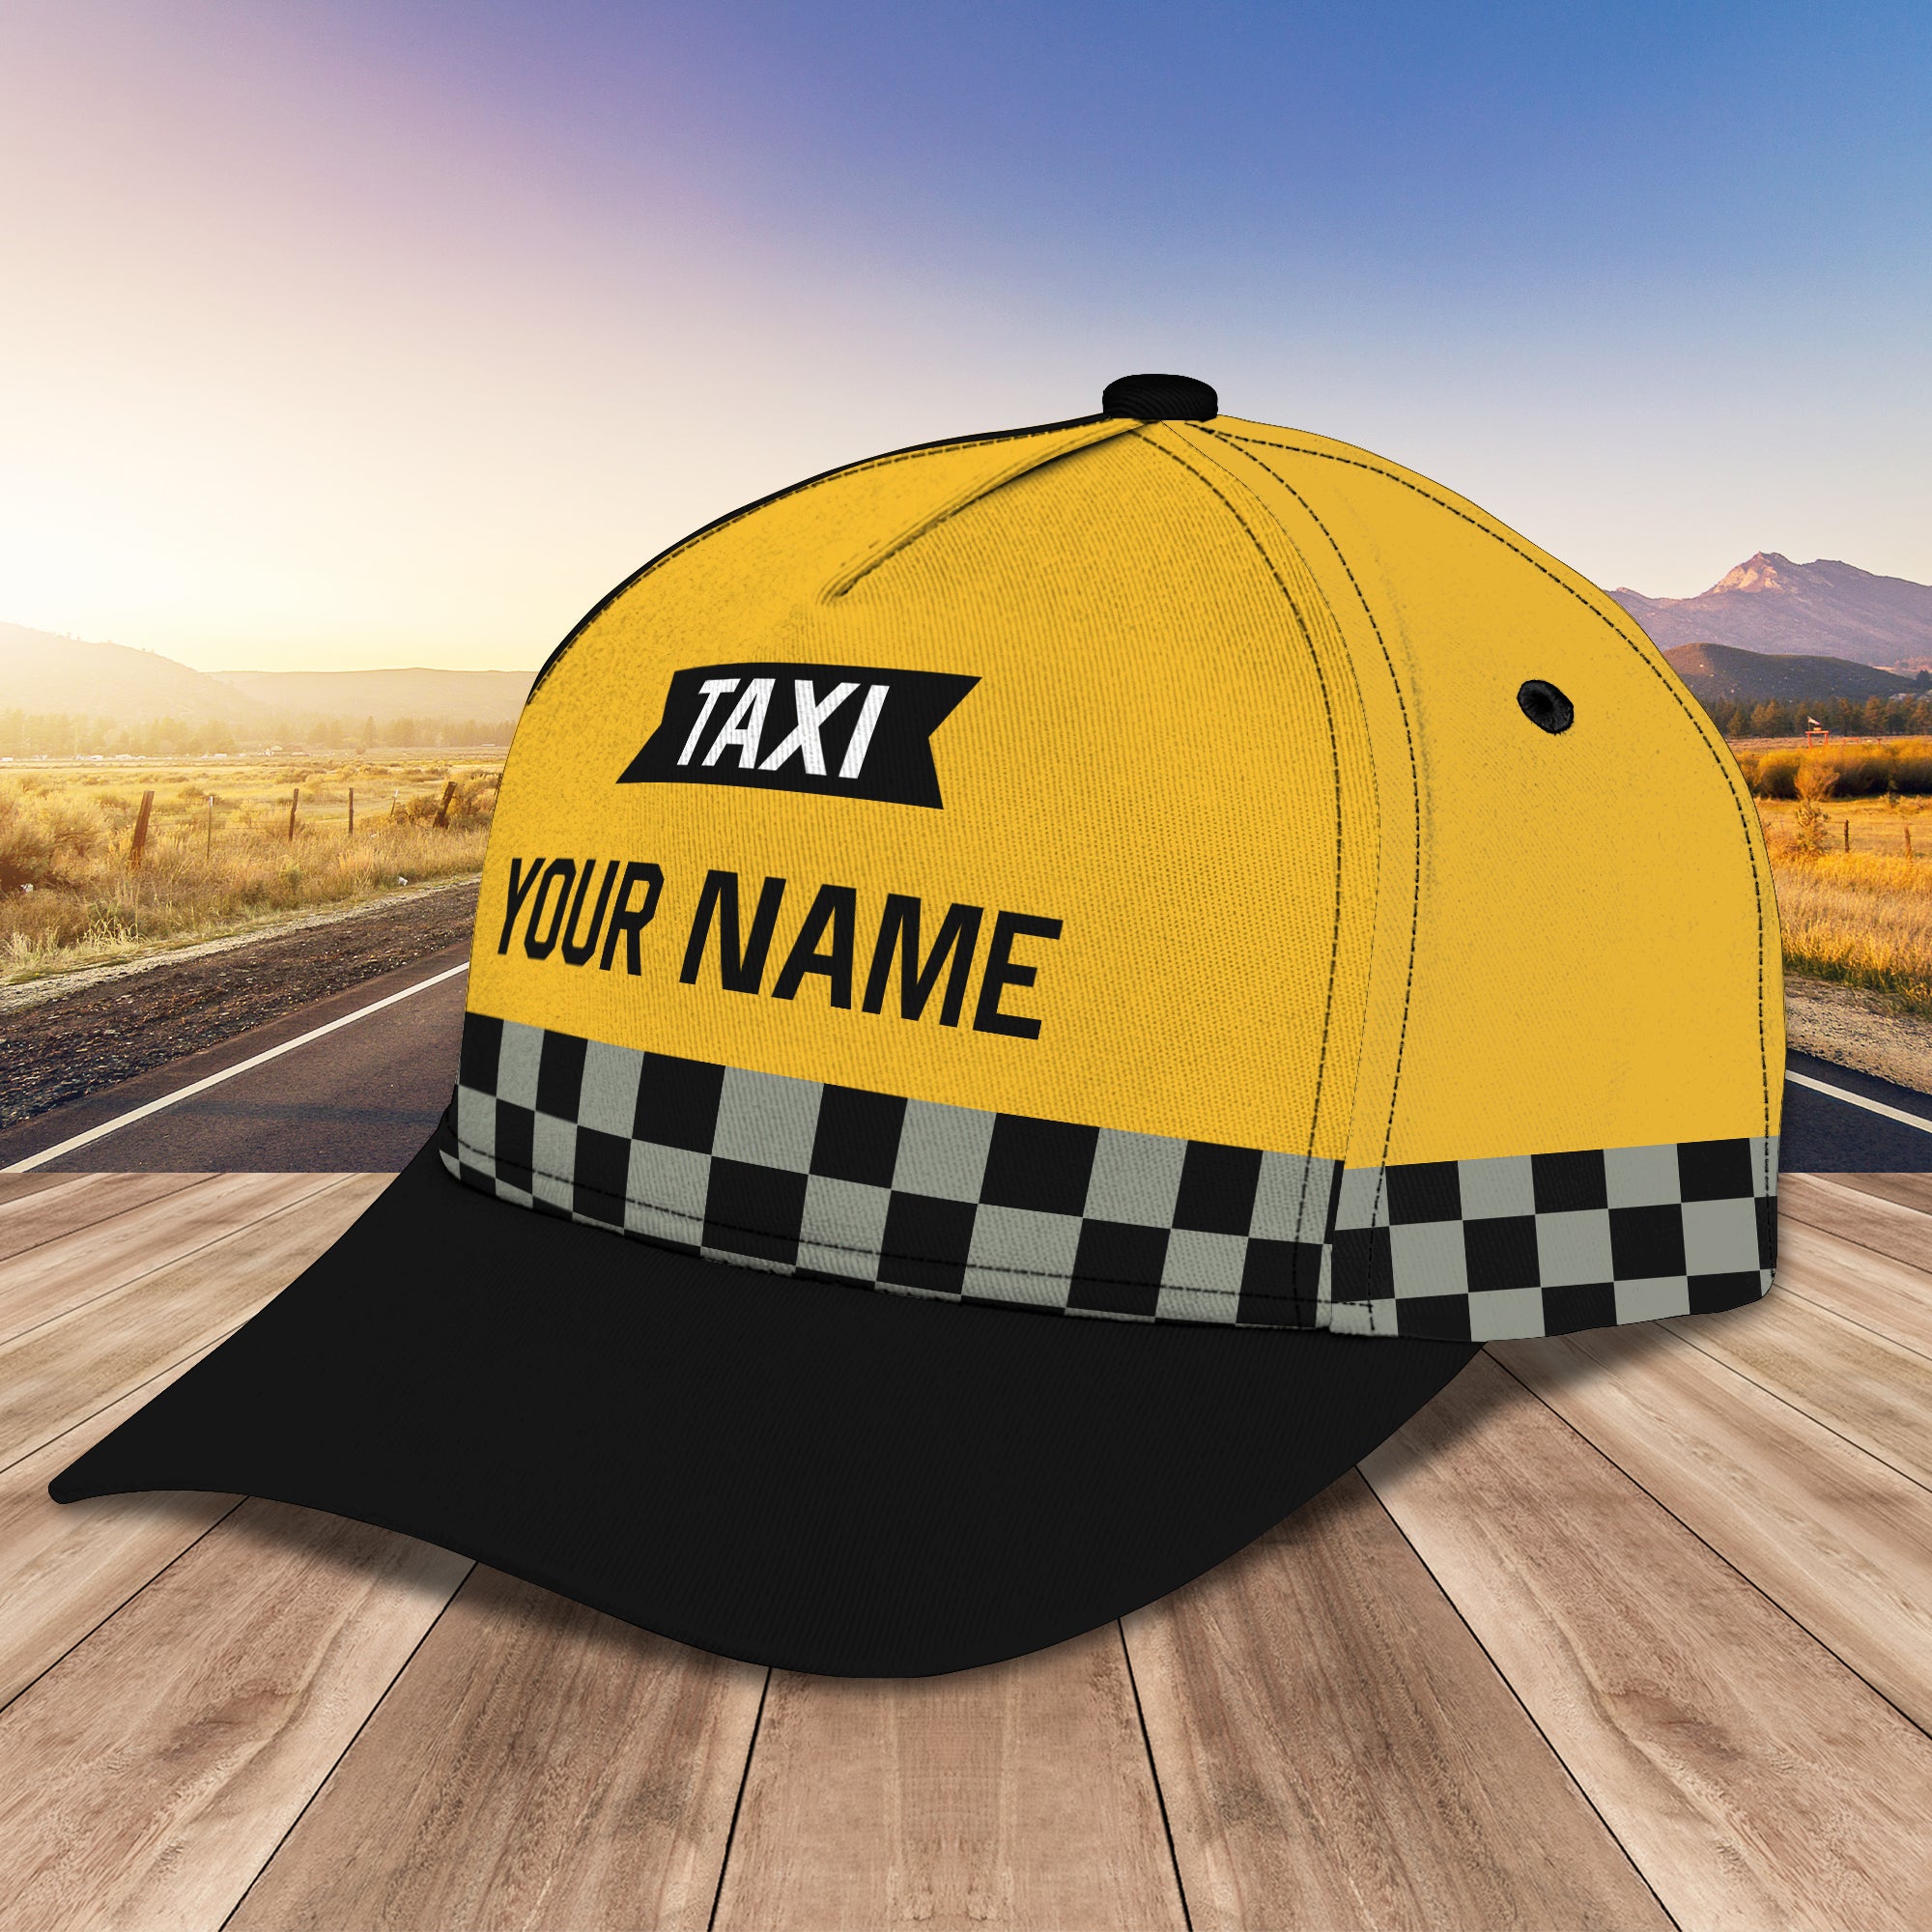 Taxi - Personalized Name Cap - Tt99-150